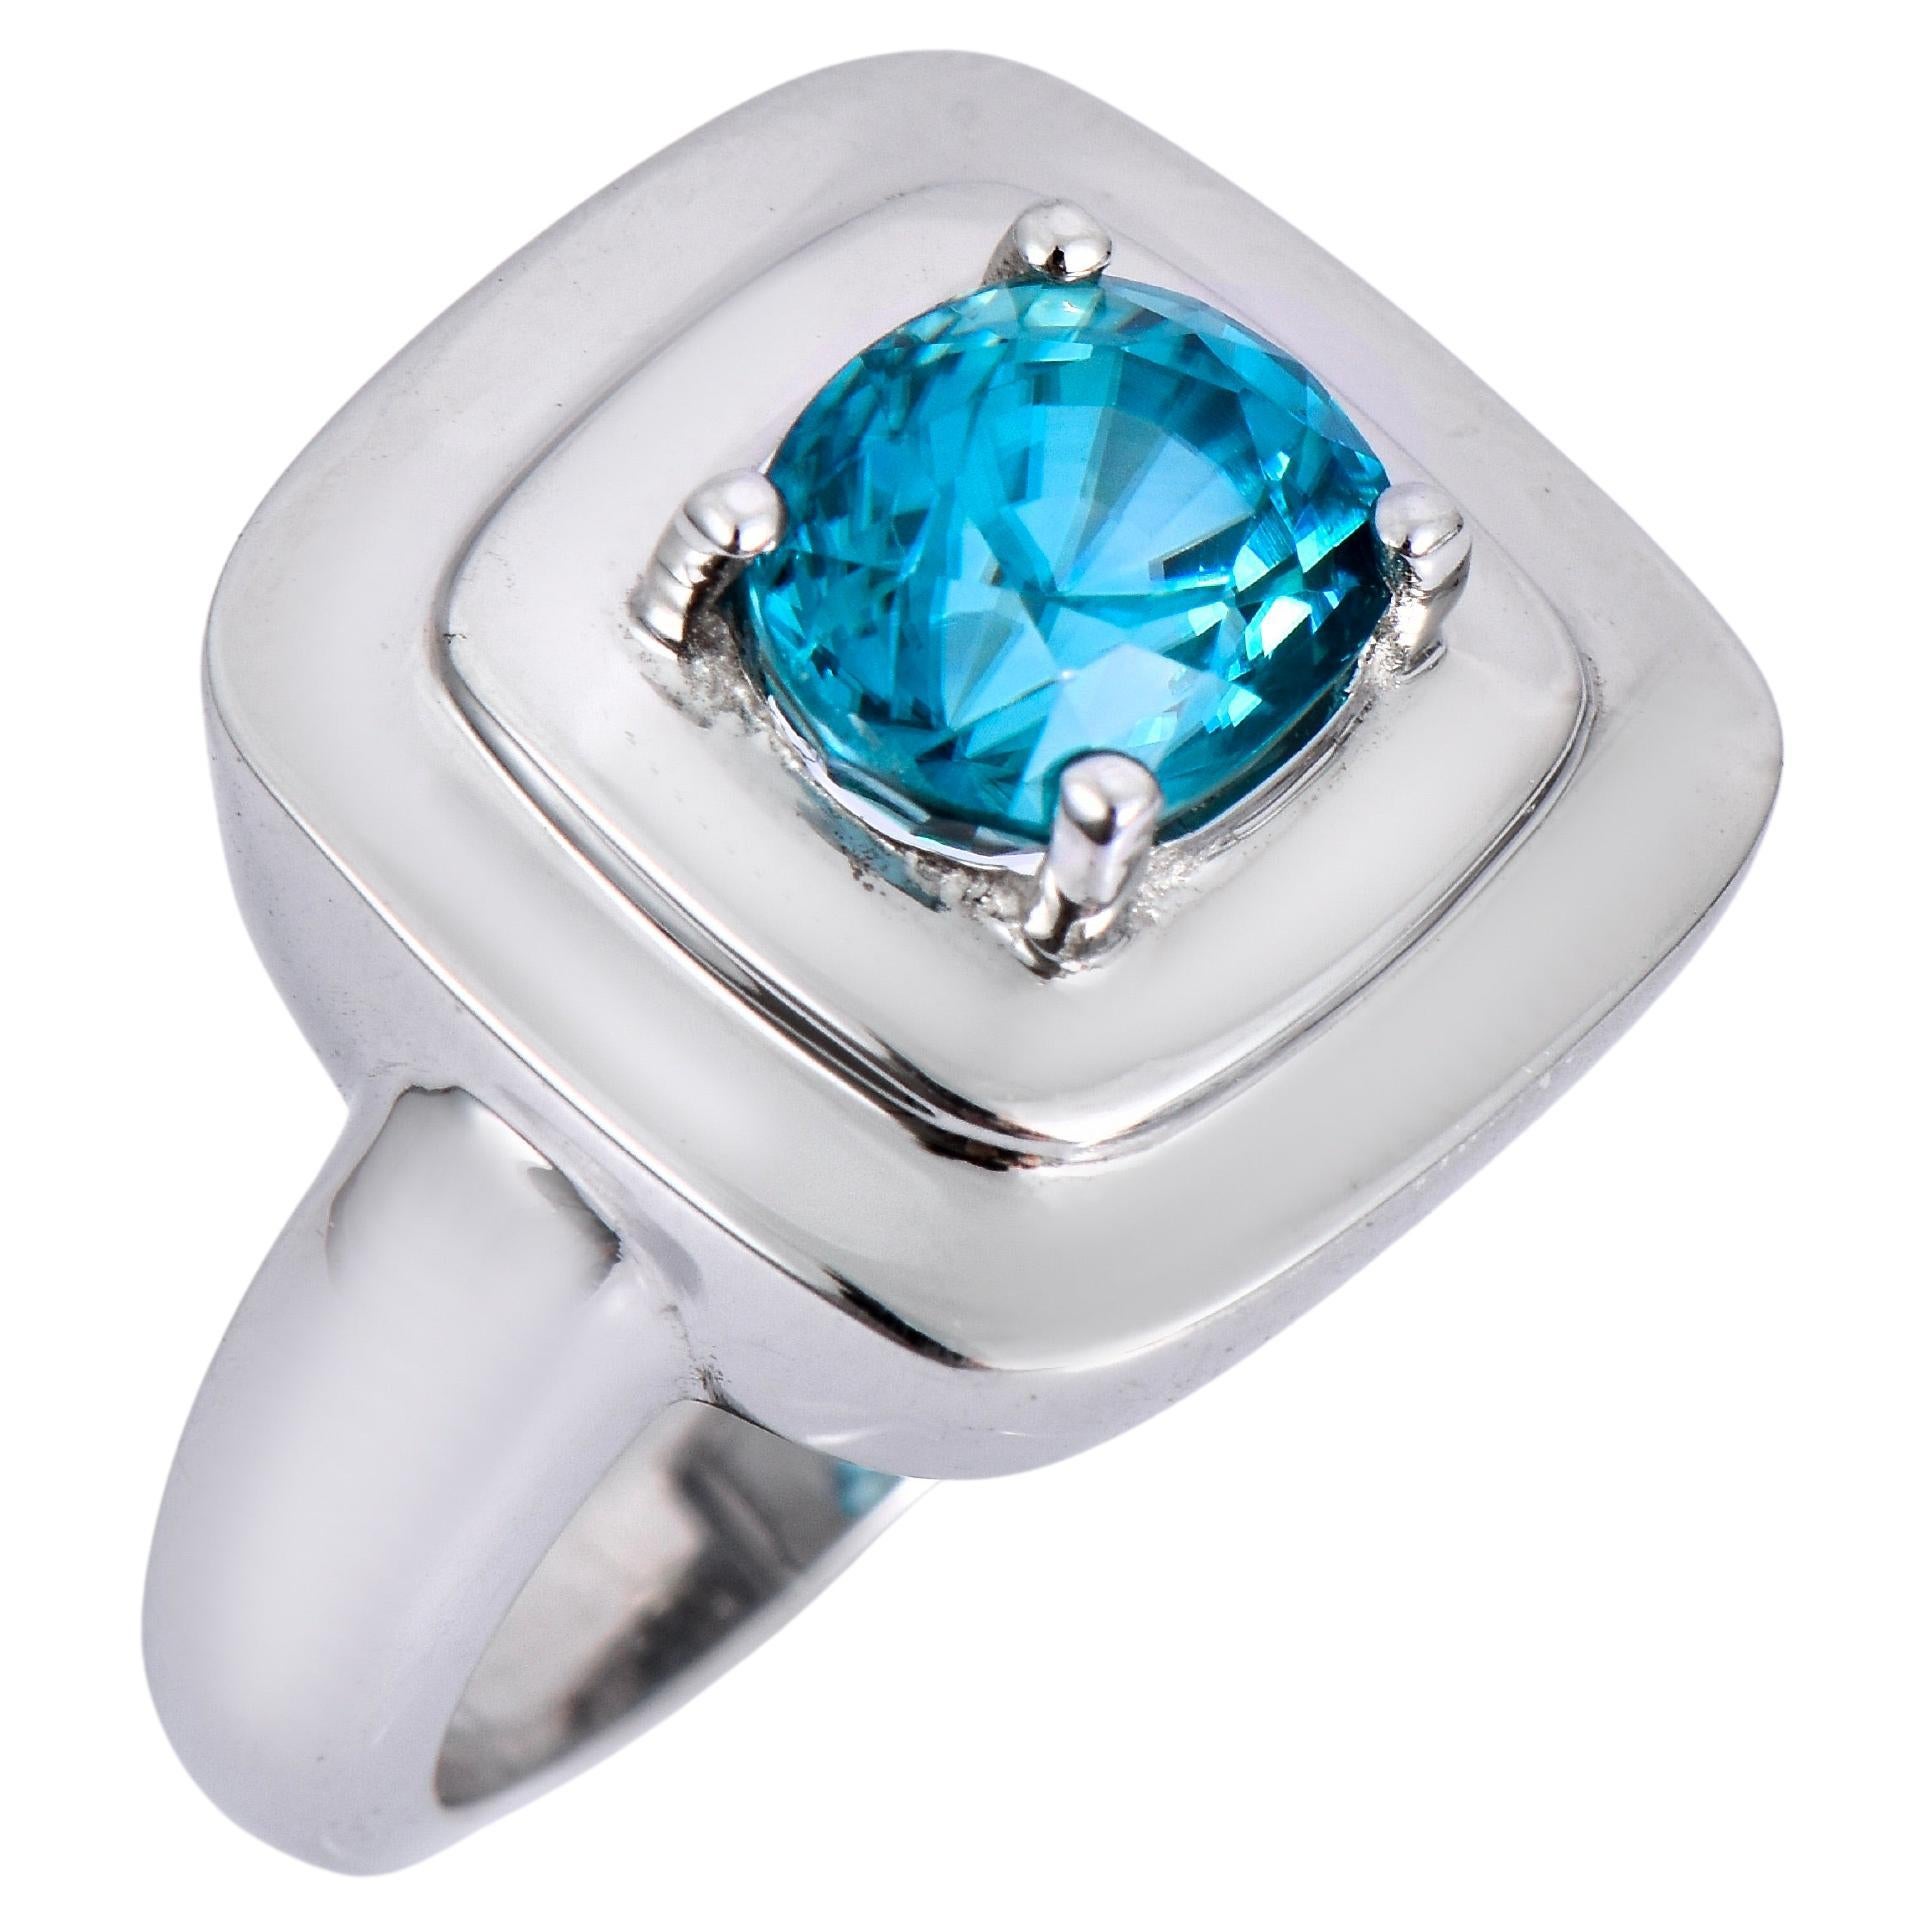 Orloff of Denmark, 6.62 ct Natural Zircon Ring in 925 Sterling Silver For Sale